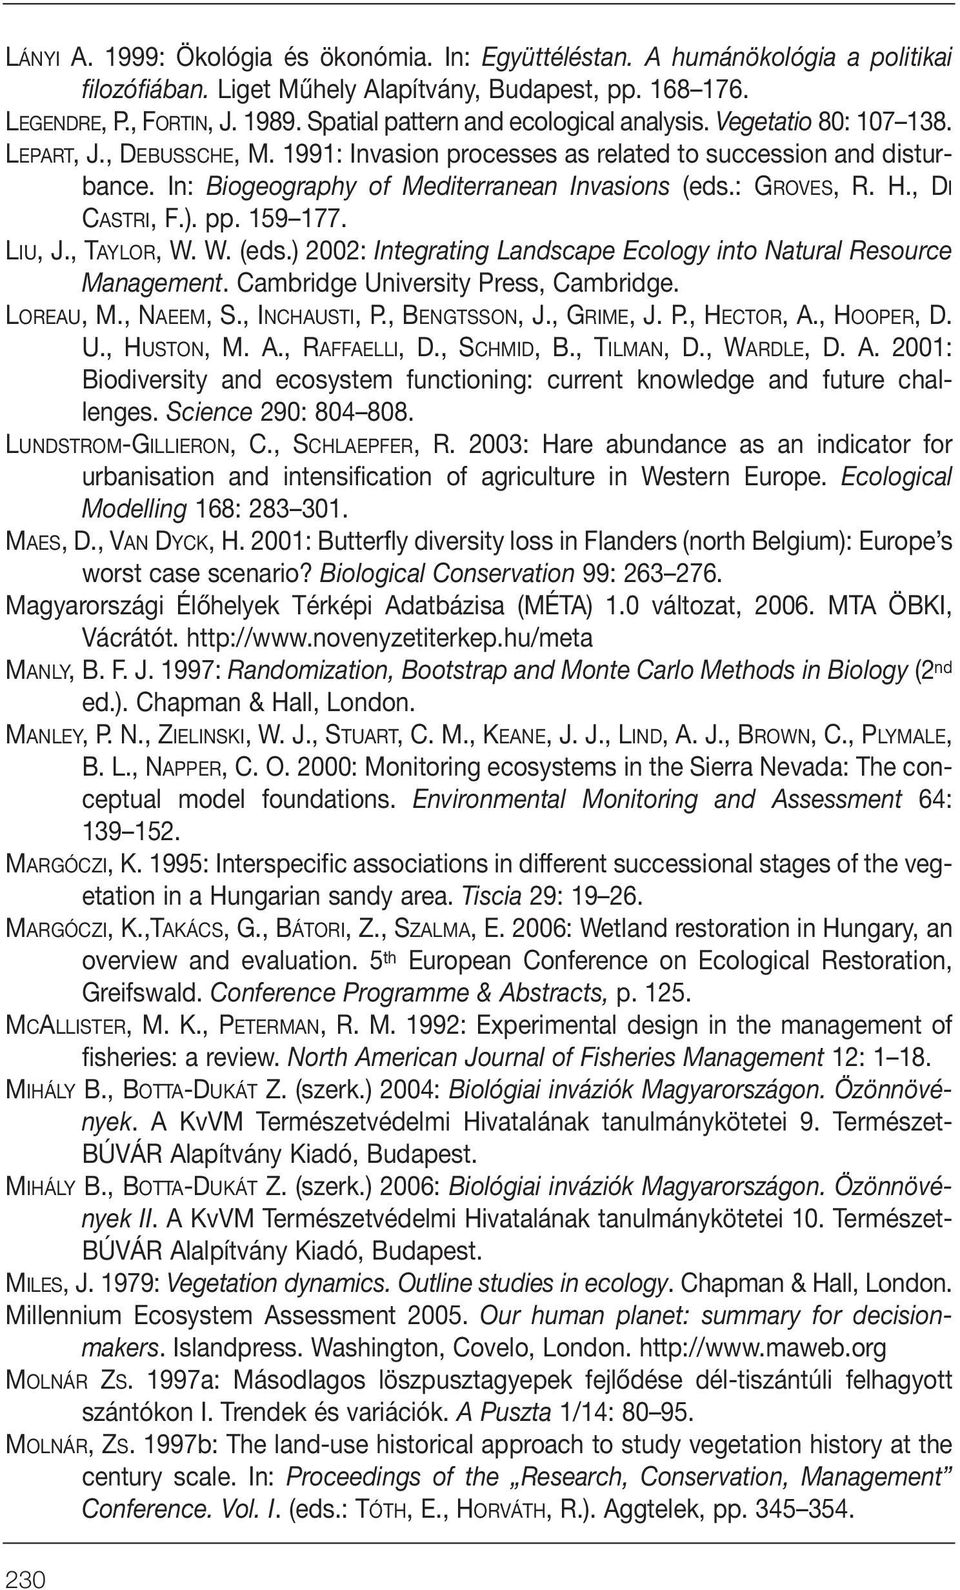 In: Biogeography of Mediterranean Invasions (eds.: GROVES, R. H., DI CASTRI, F.). pp. 159 177. LIU, J., TAYLOR, W. W. (eds.) 2002: Integrating Landscape Ecology into Natural Resource Management.